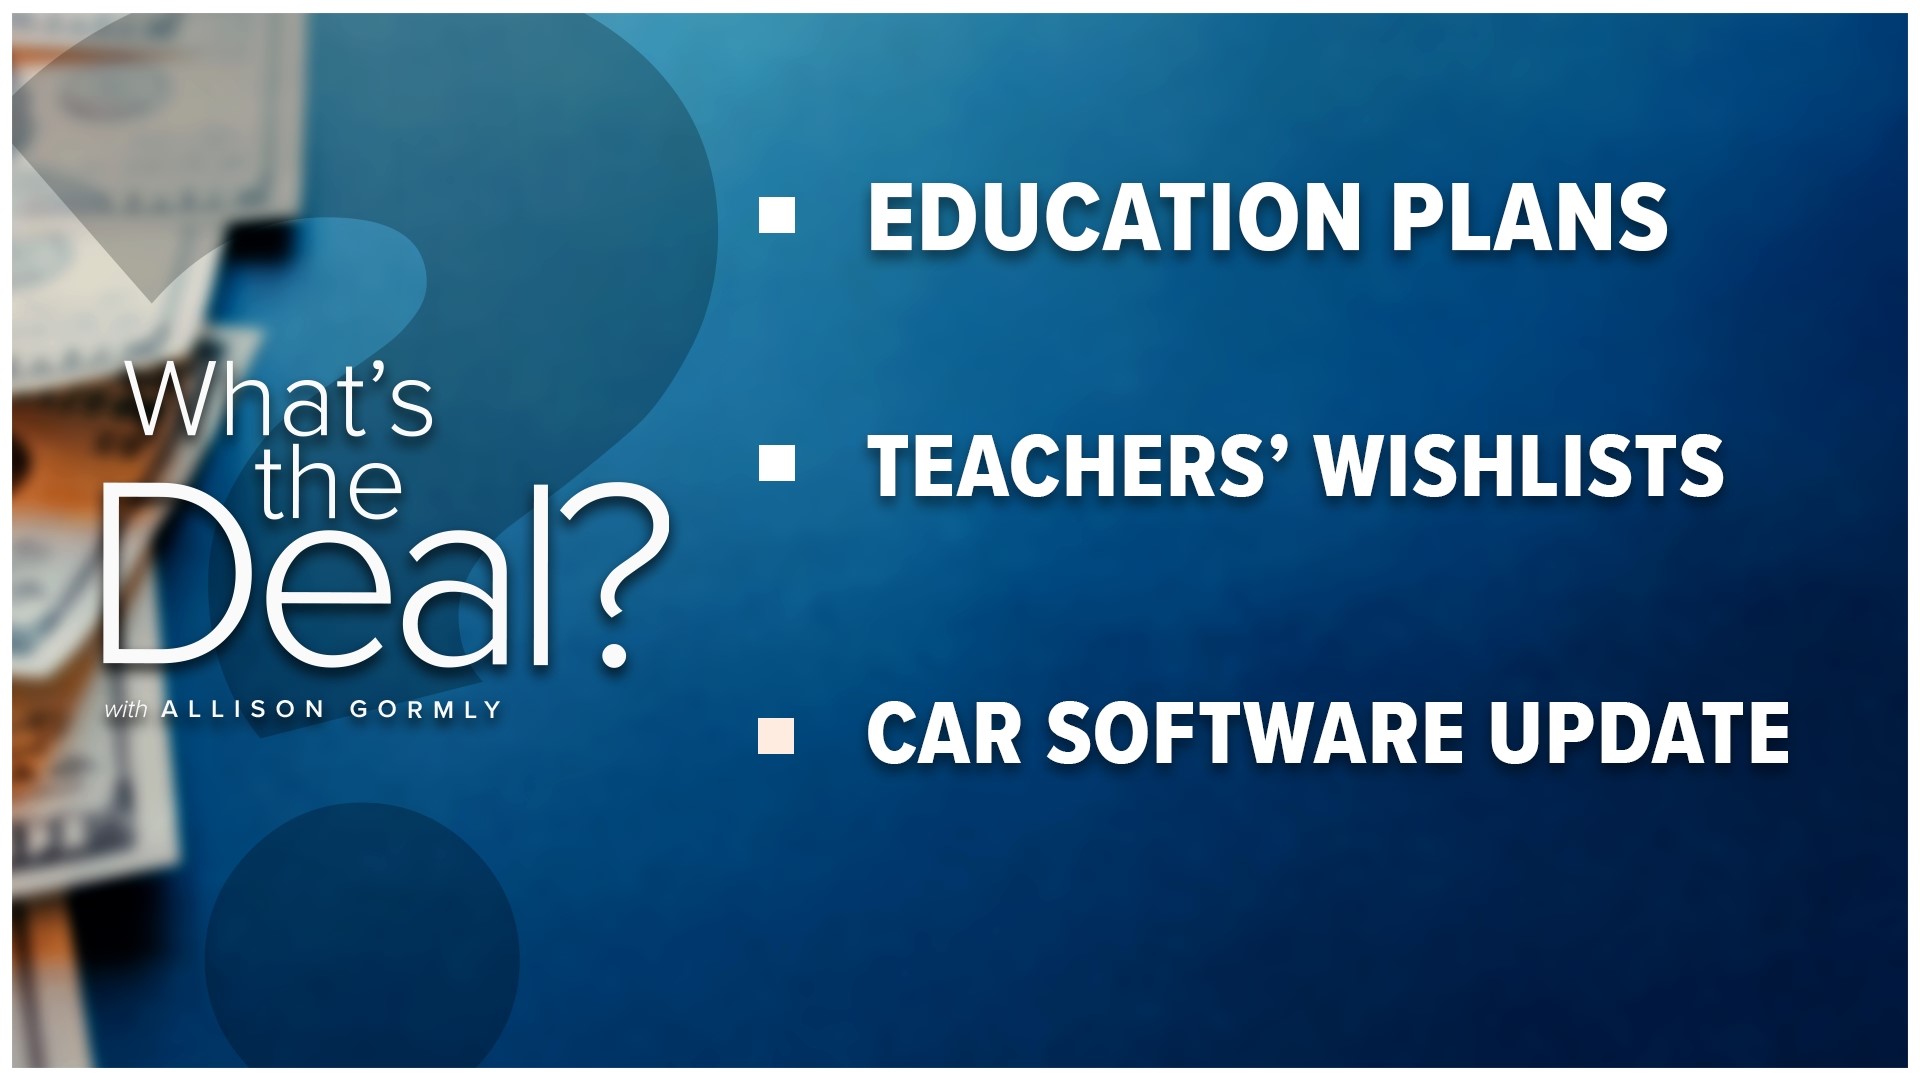 We look into what's the deal with education plans and how teachers can get help from the community for school supplies. Plus, the car software update to stop thefts.